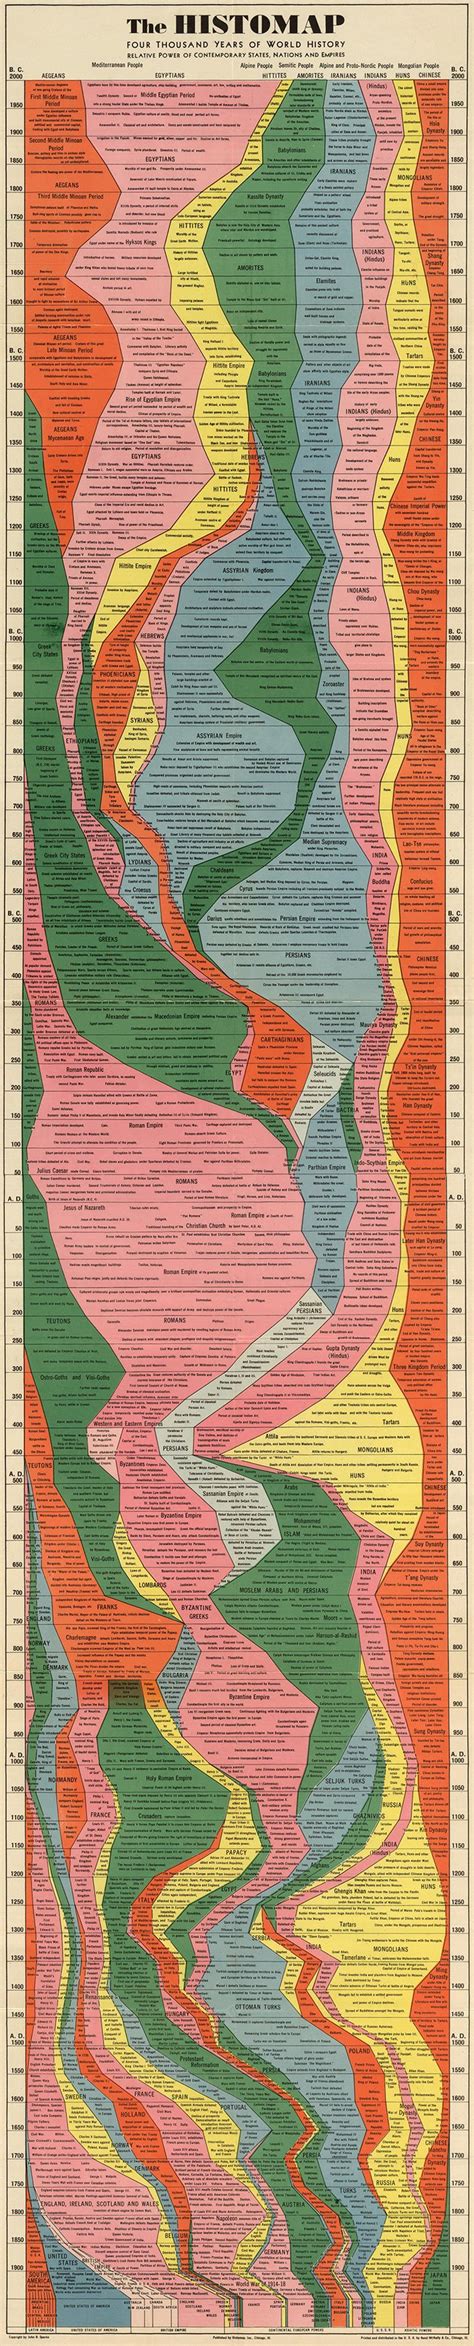 Infographic Years Of Human History Captured In One Retro